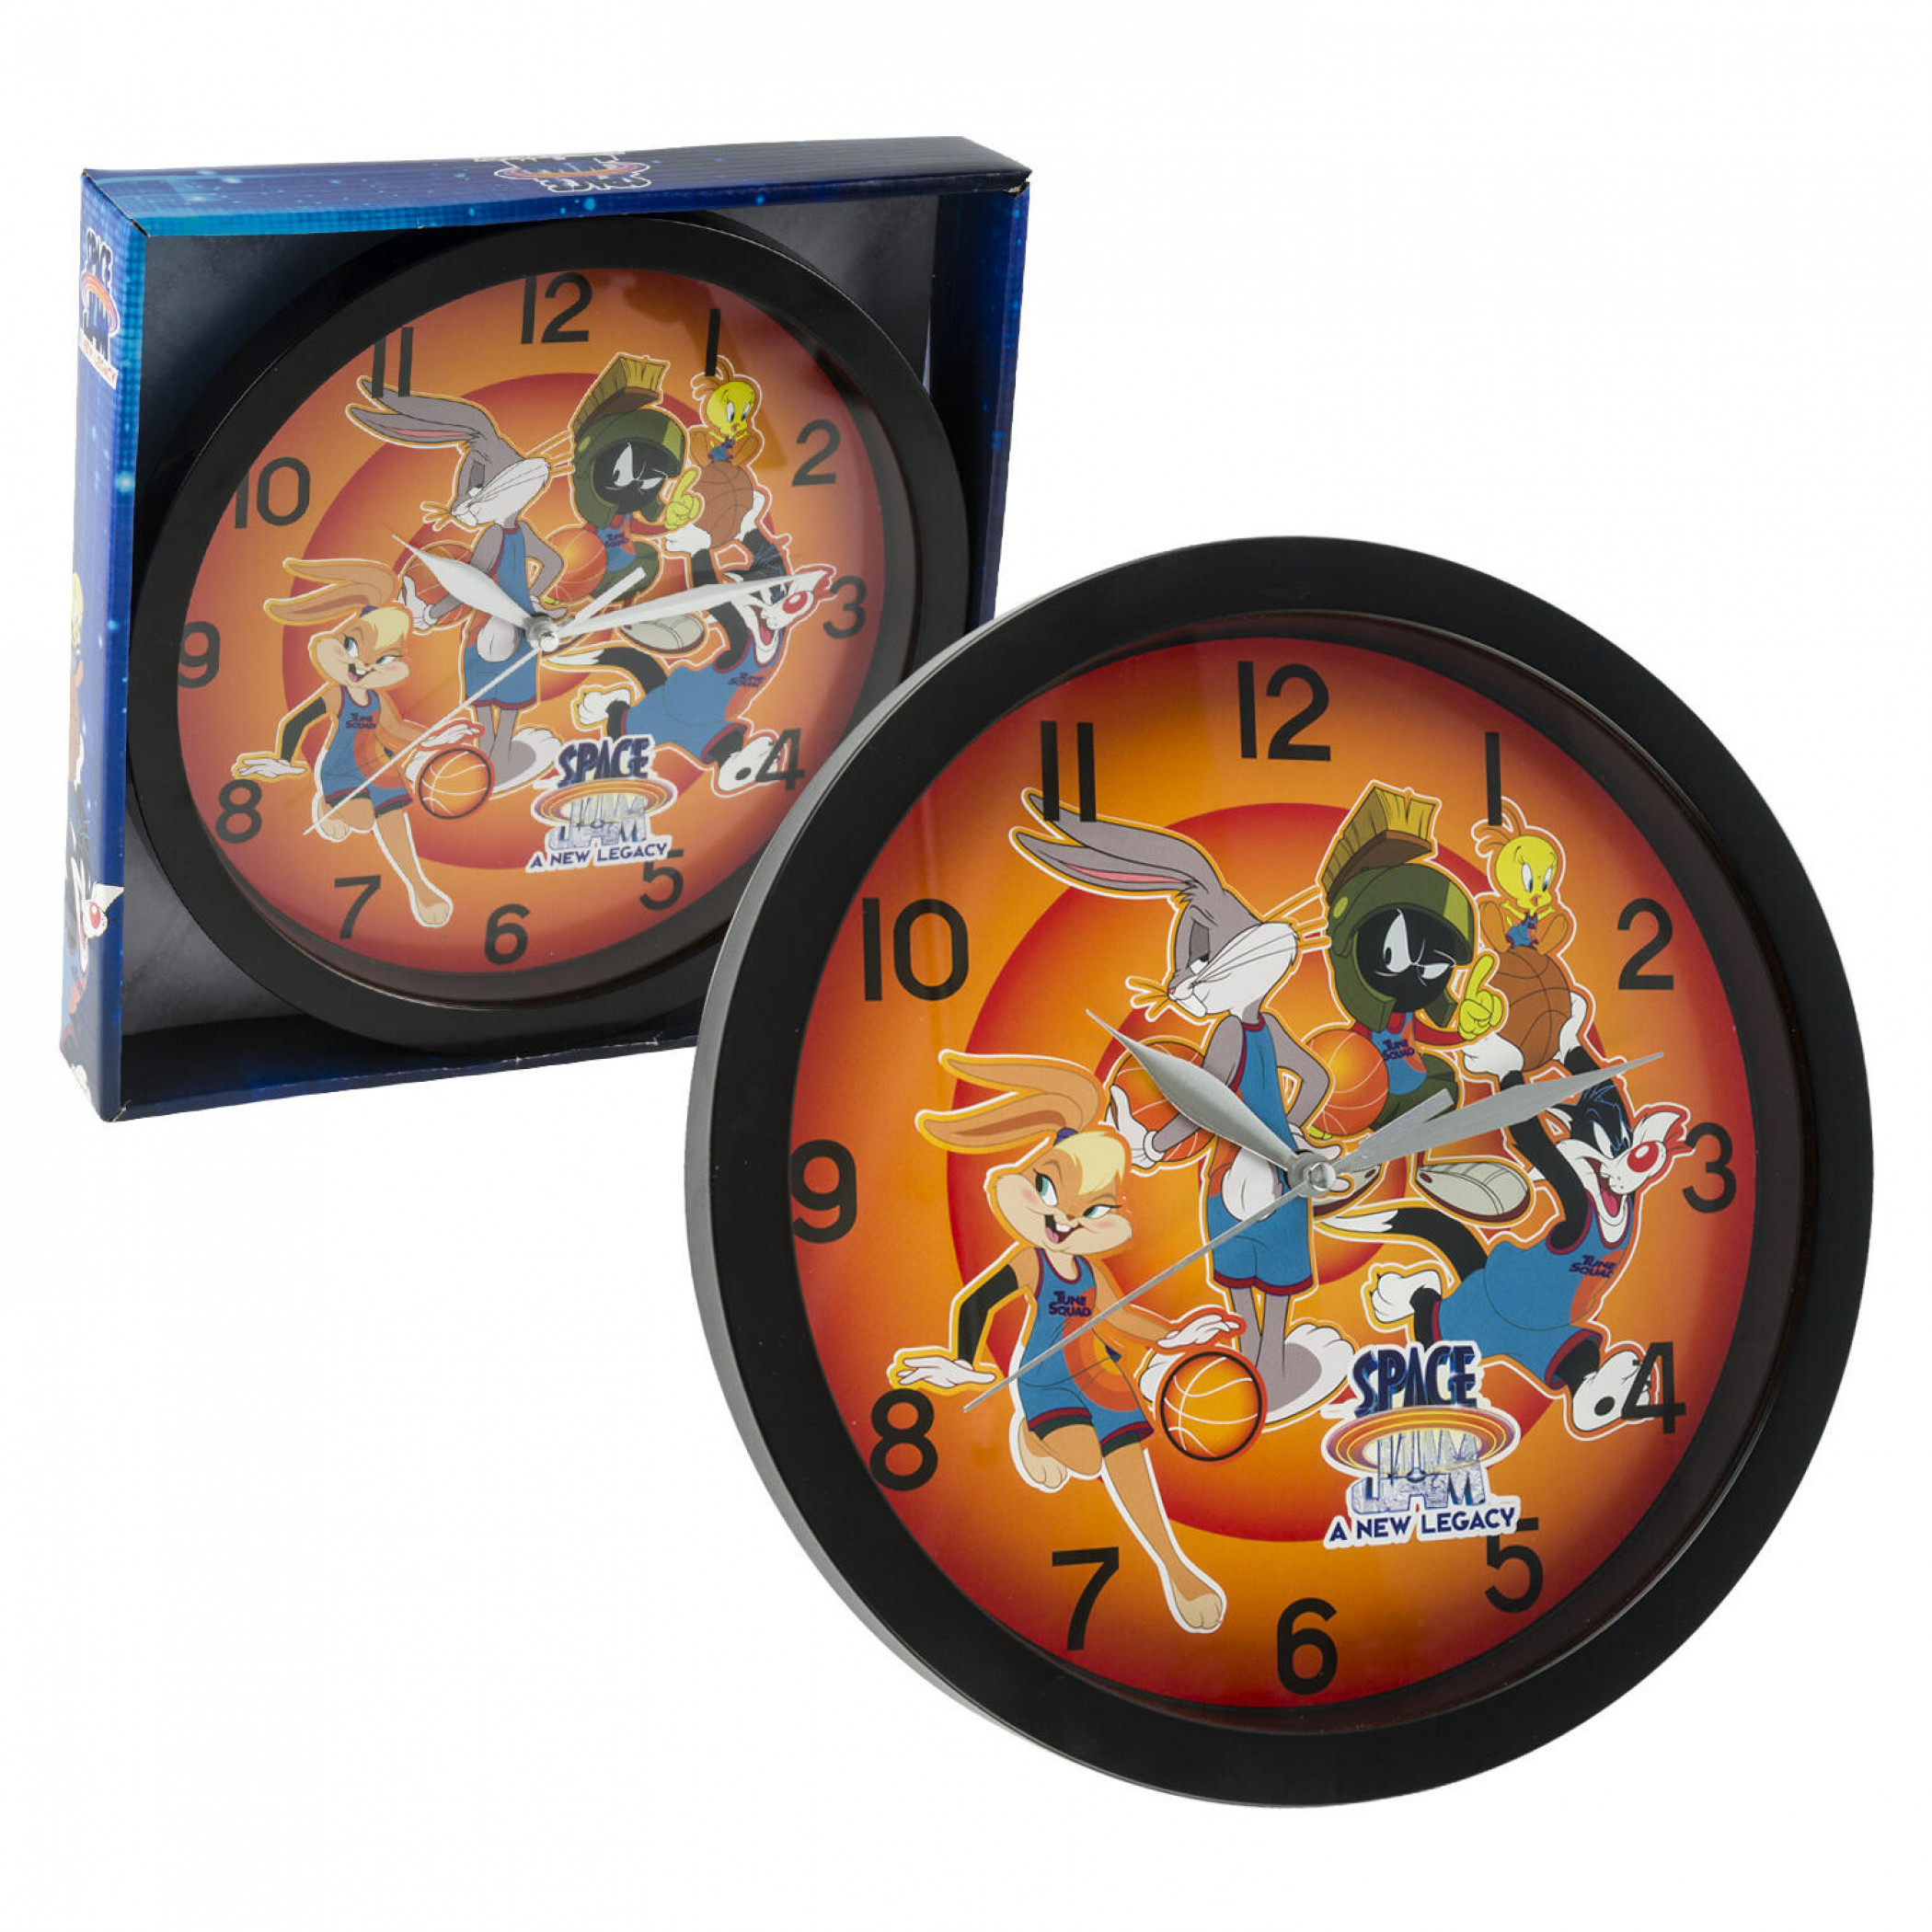 Looney Tunes Space Jam Characters Print 9 3/4" Wall Clock